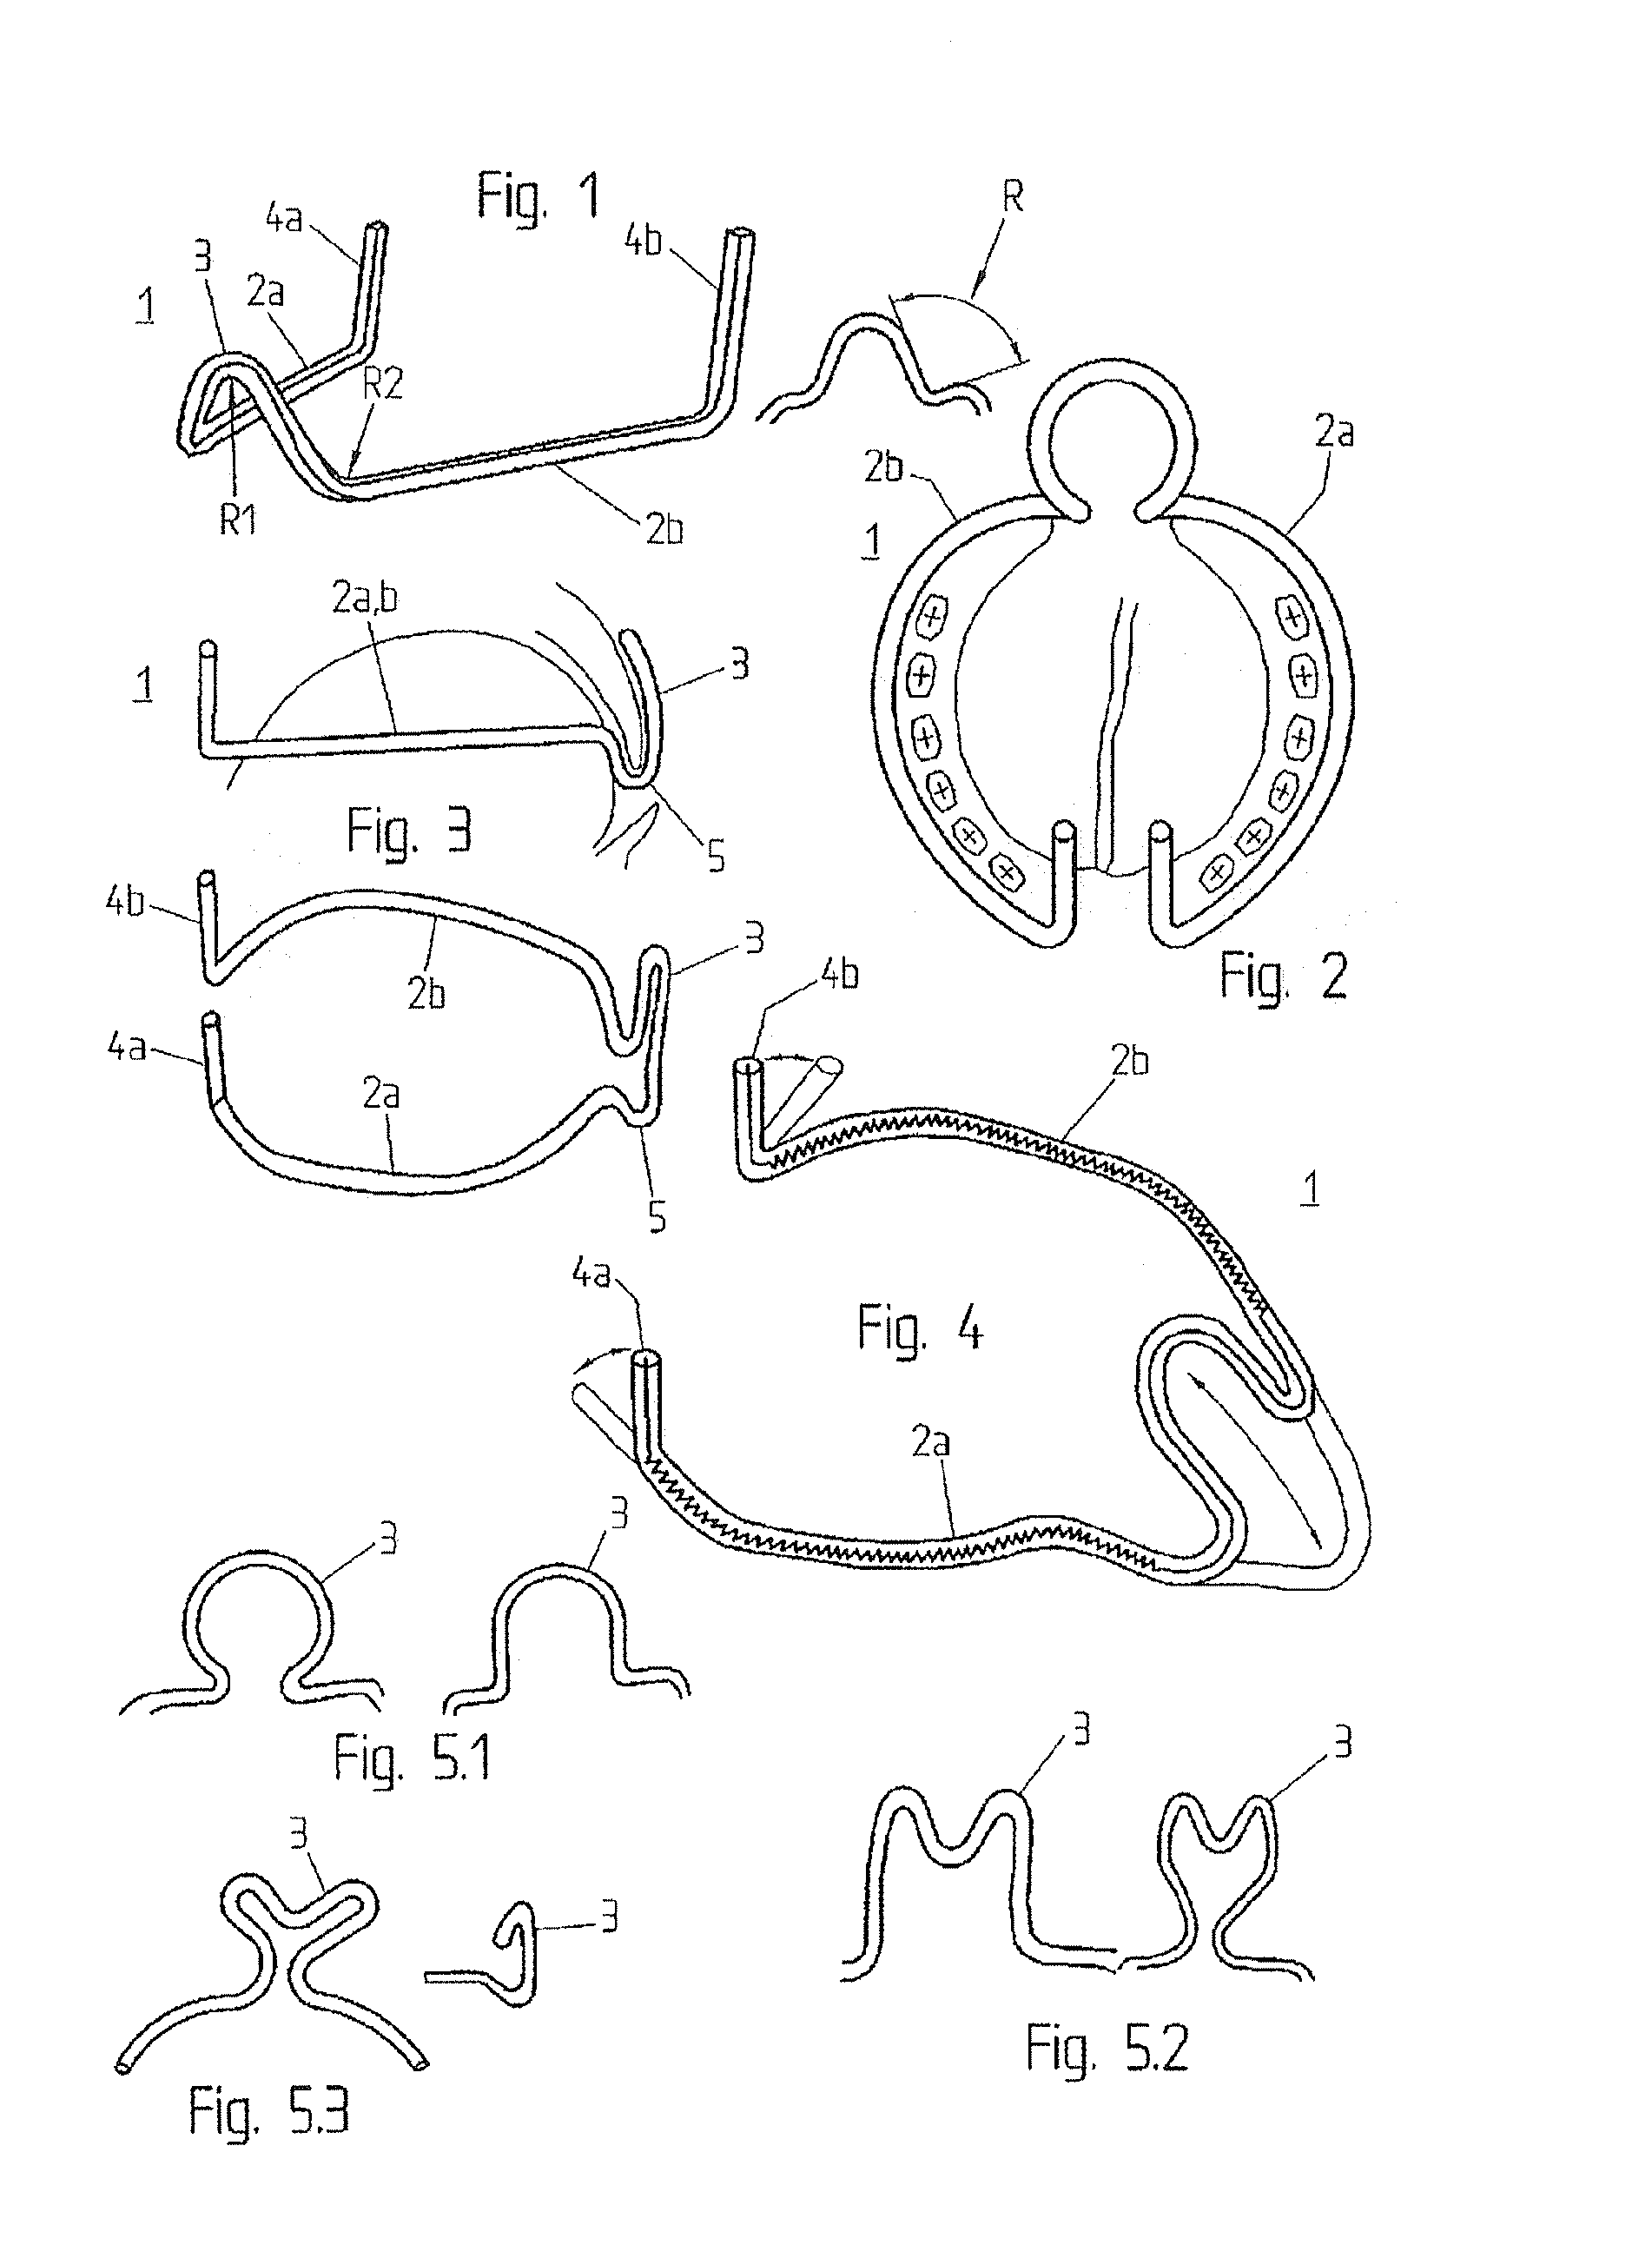 Device for treating snoring sounds, interruptions in breathing and obstructive sleep apnea